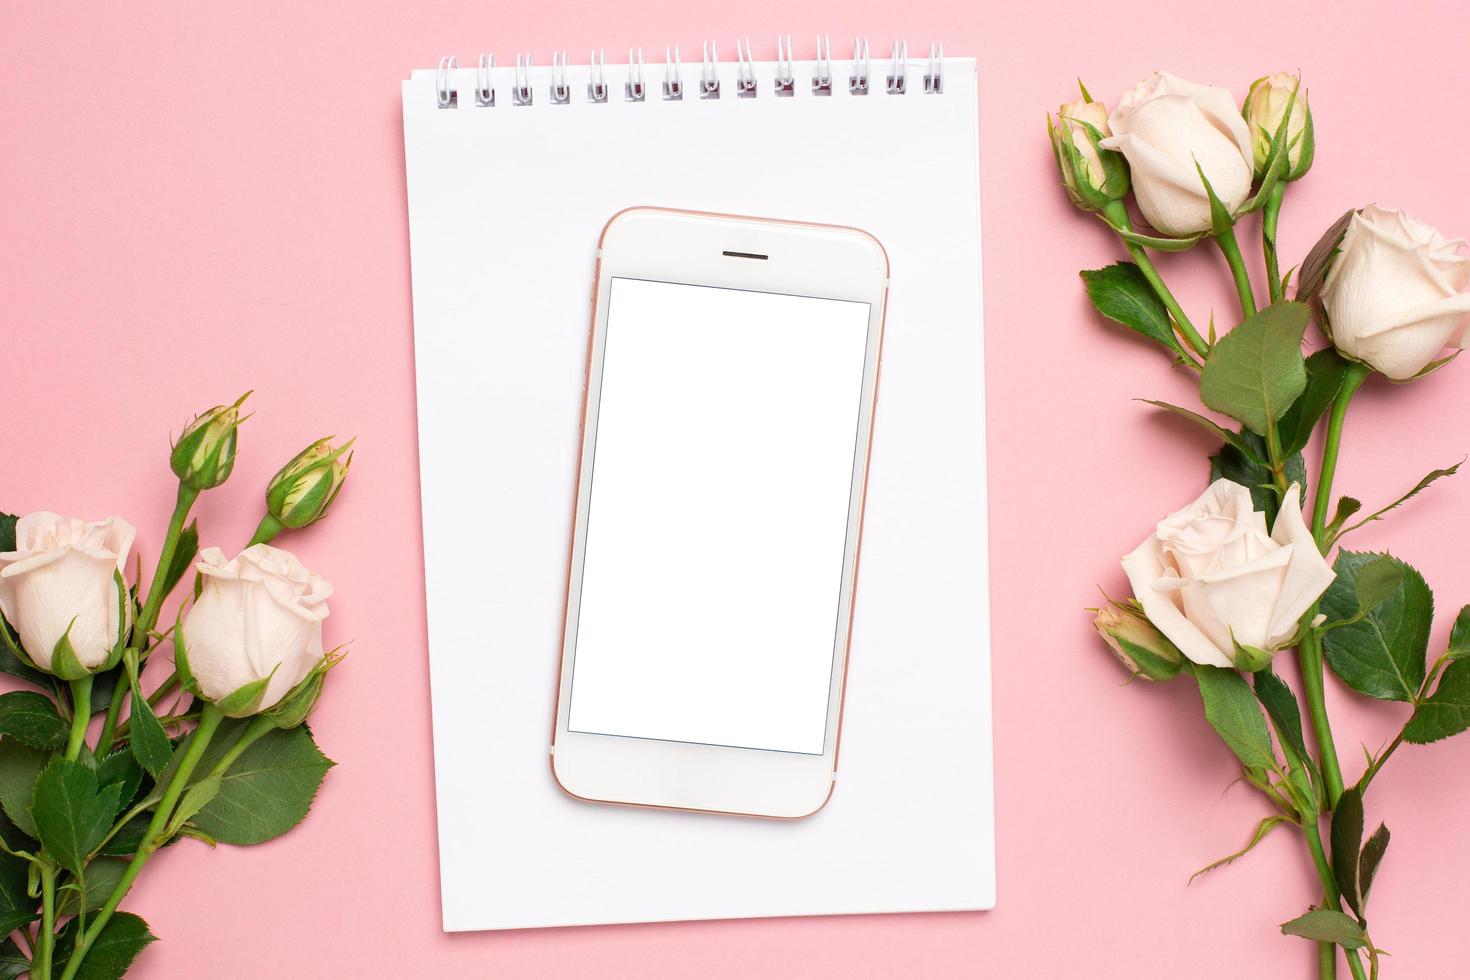 Mobile phone with a white notebook and roses flowers on pink background photo